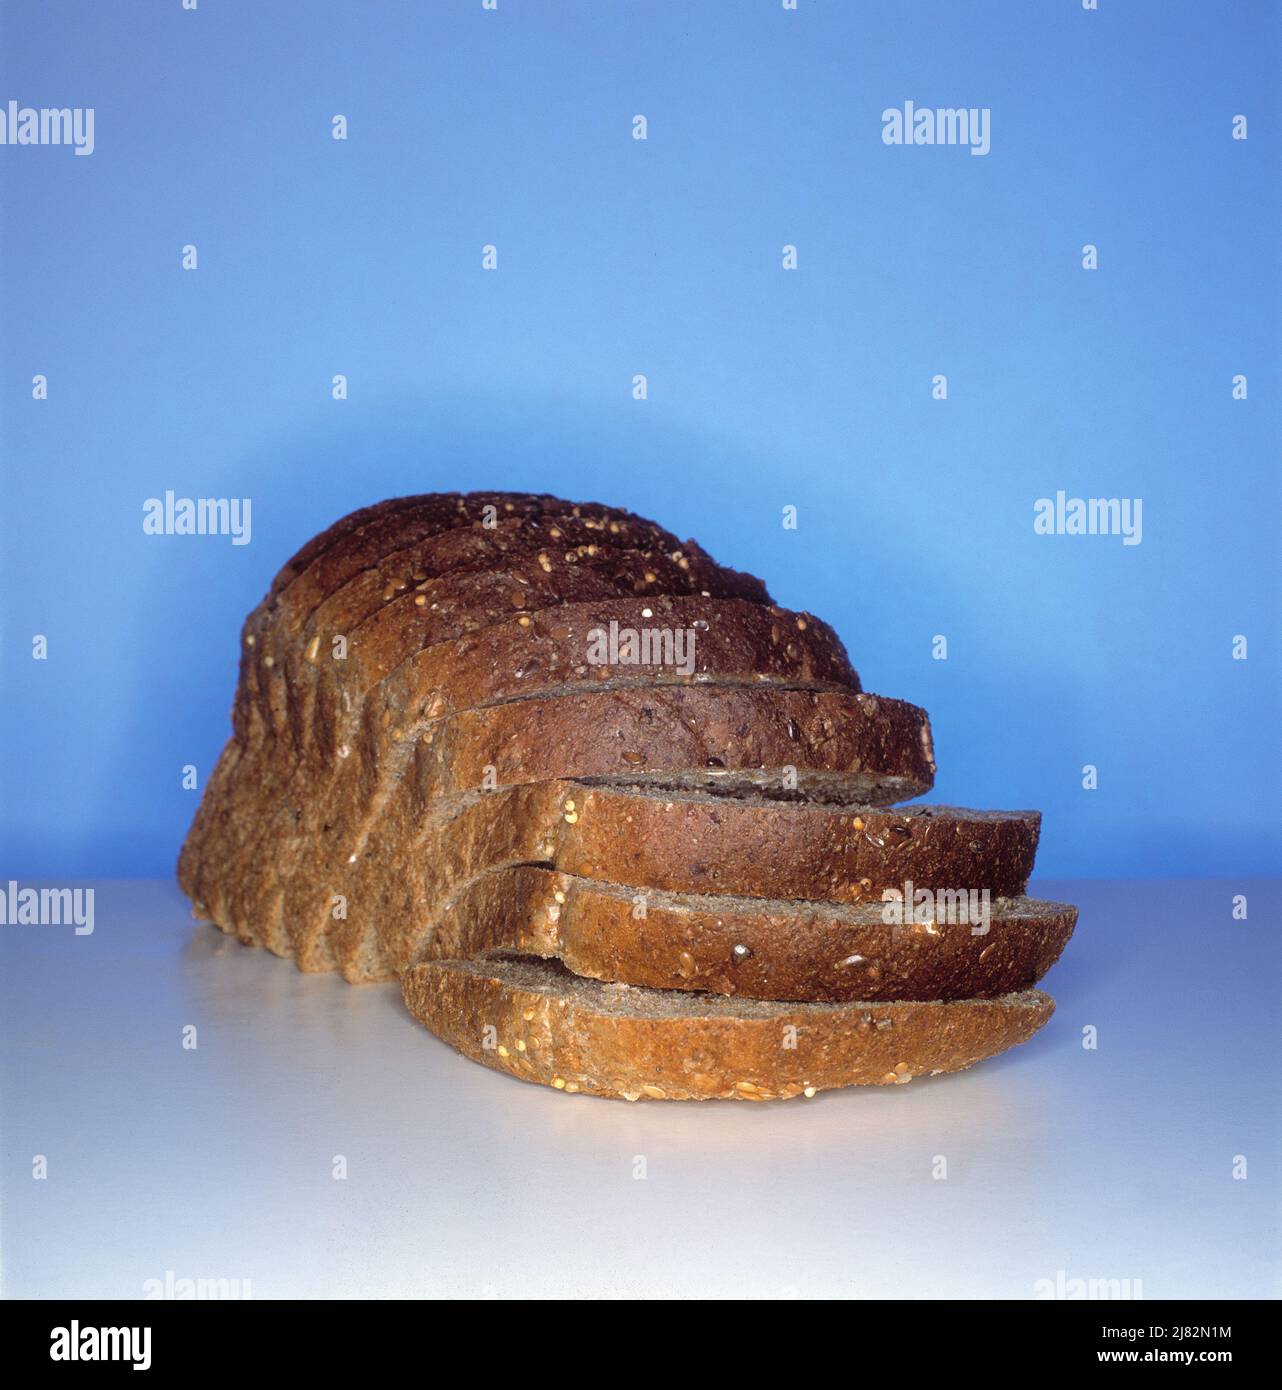 Sliced wholemeal brown bread. Stock Photo